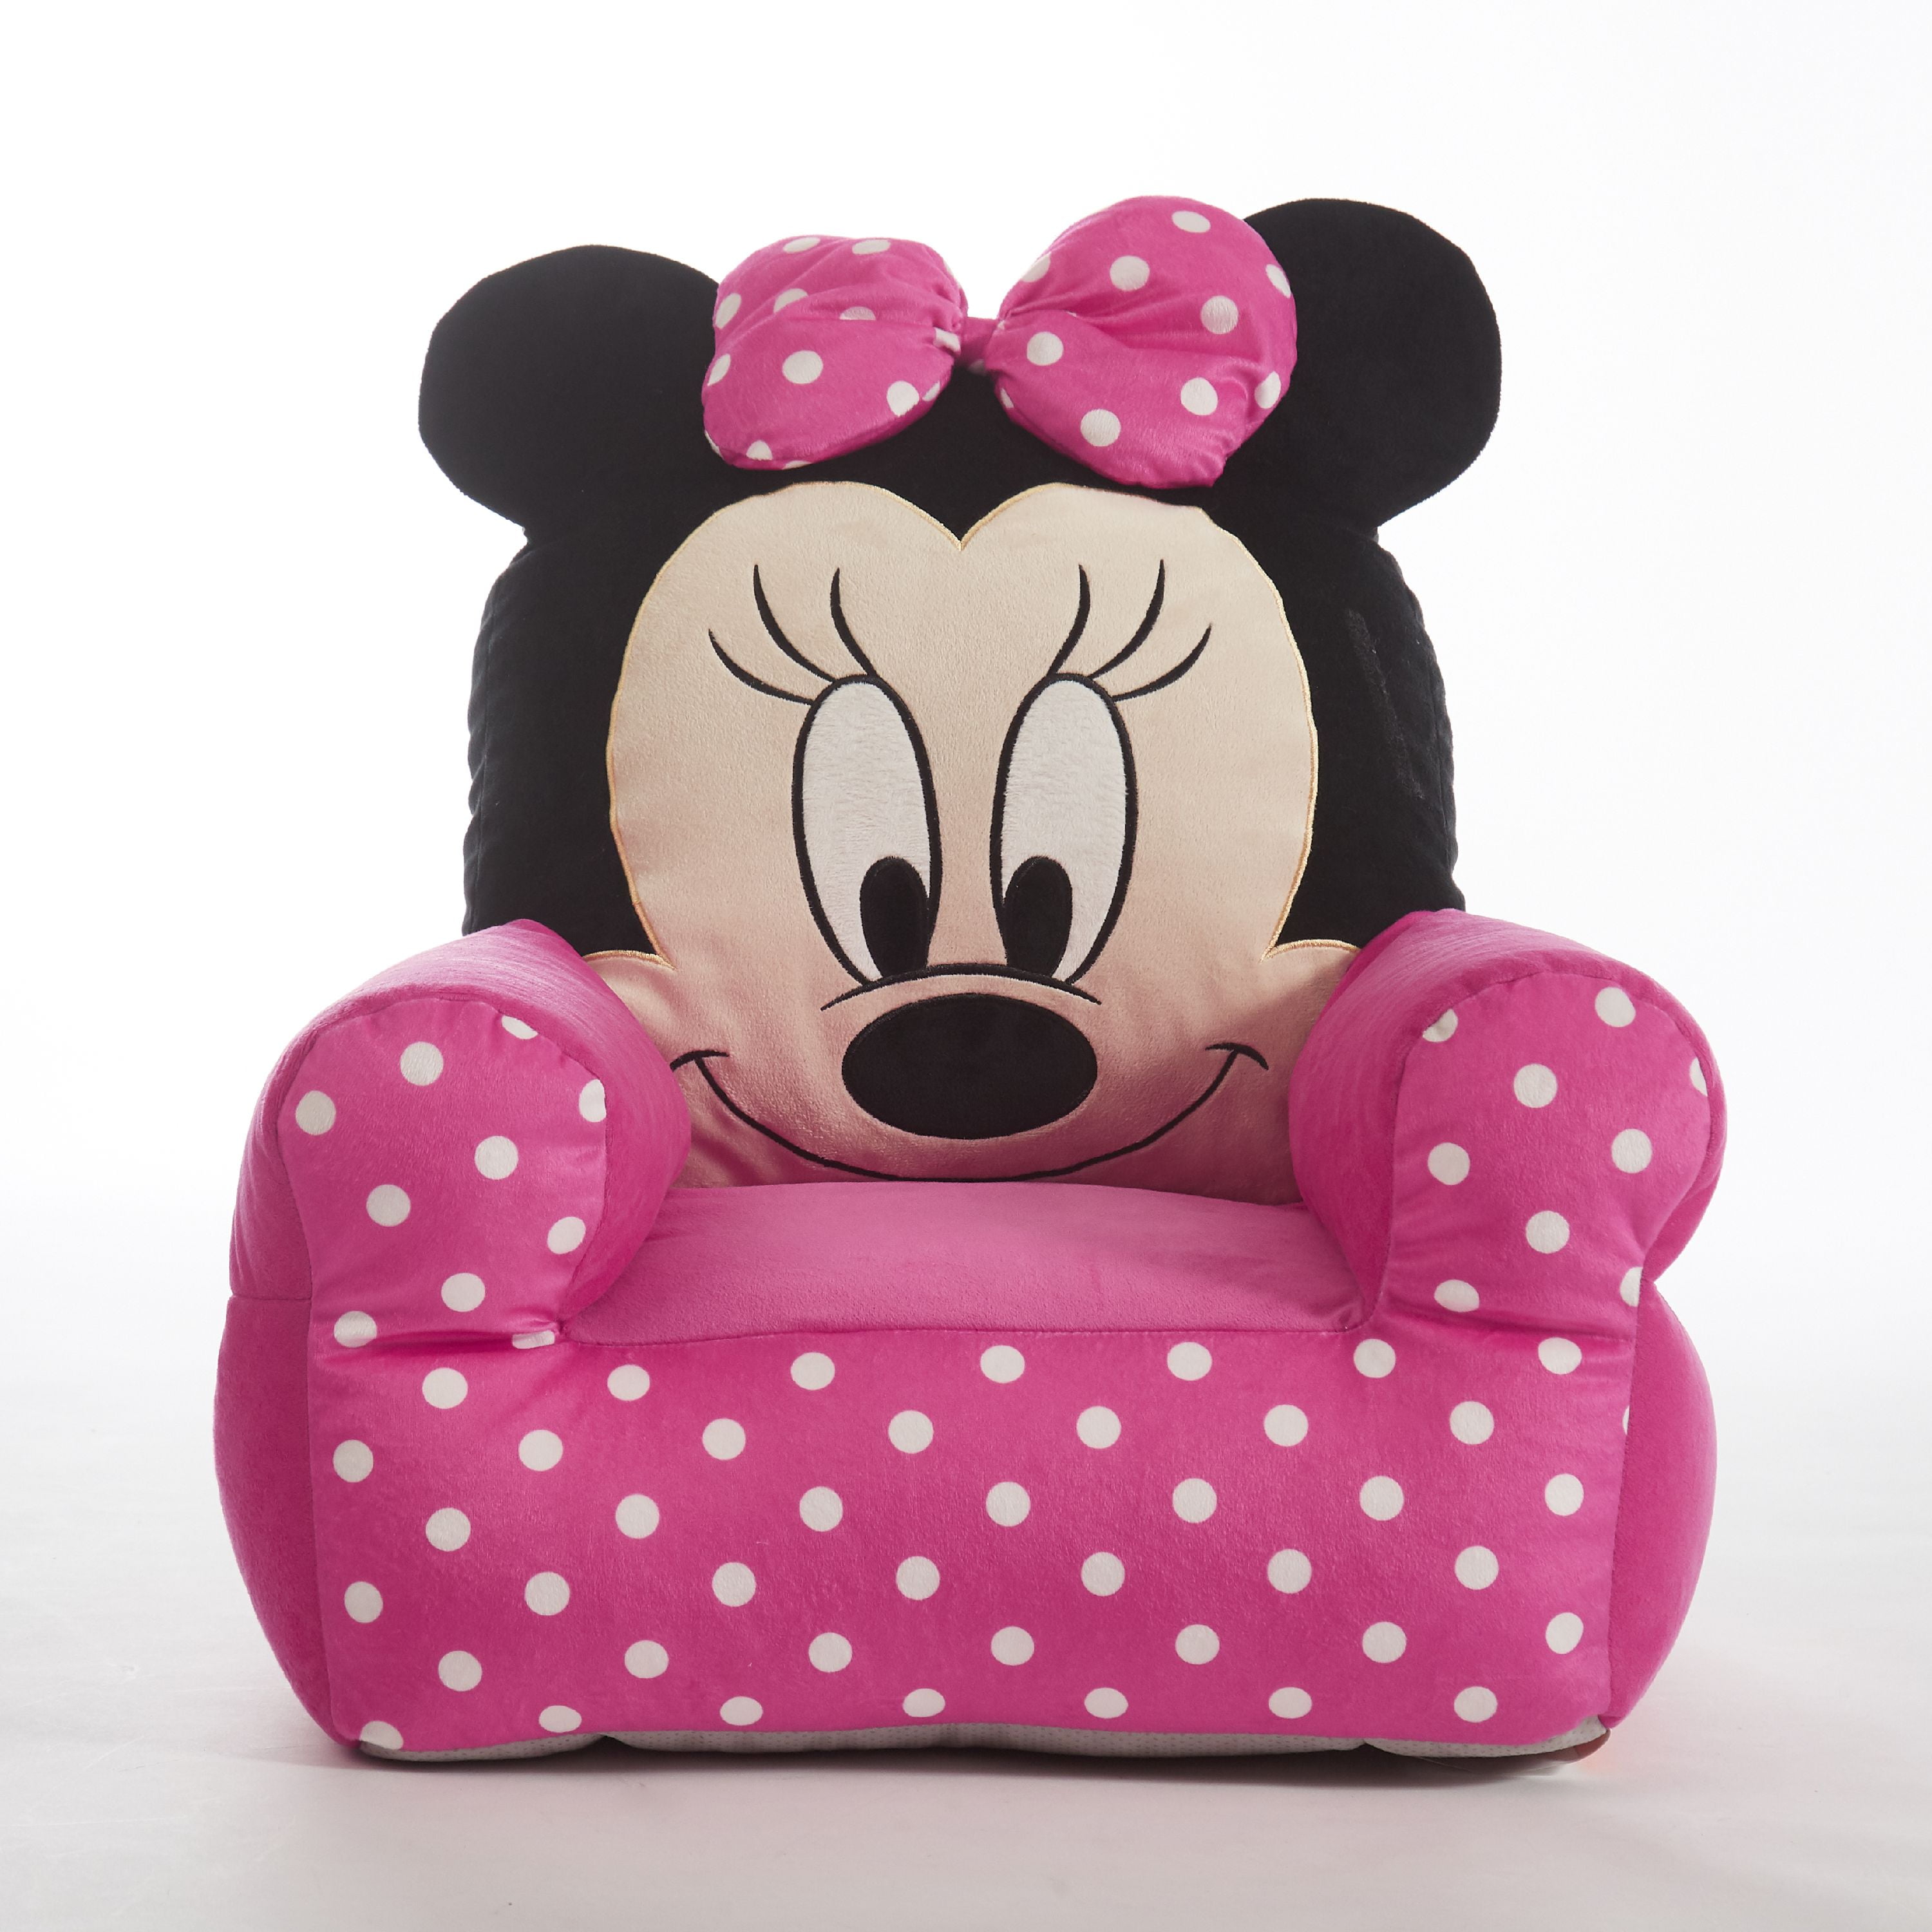 Minnie Mouse Plush Bean Bag Sofa Chair, Minnie Mouse Upholstered Chair With Ottoman Storage